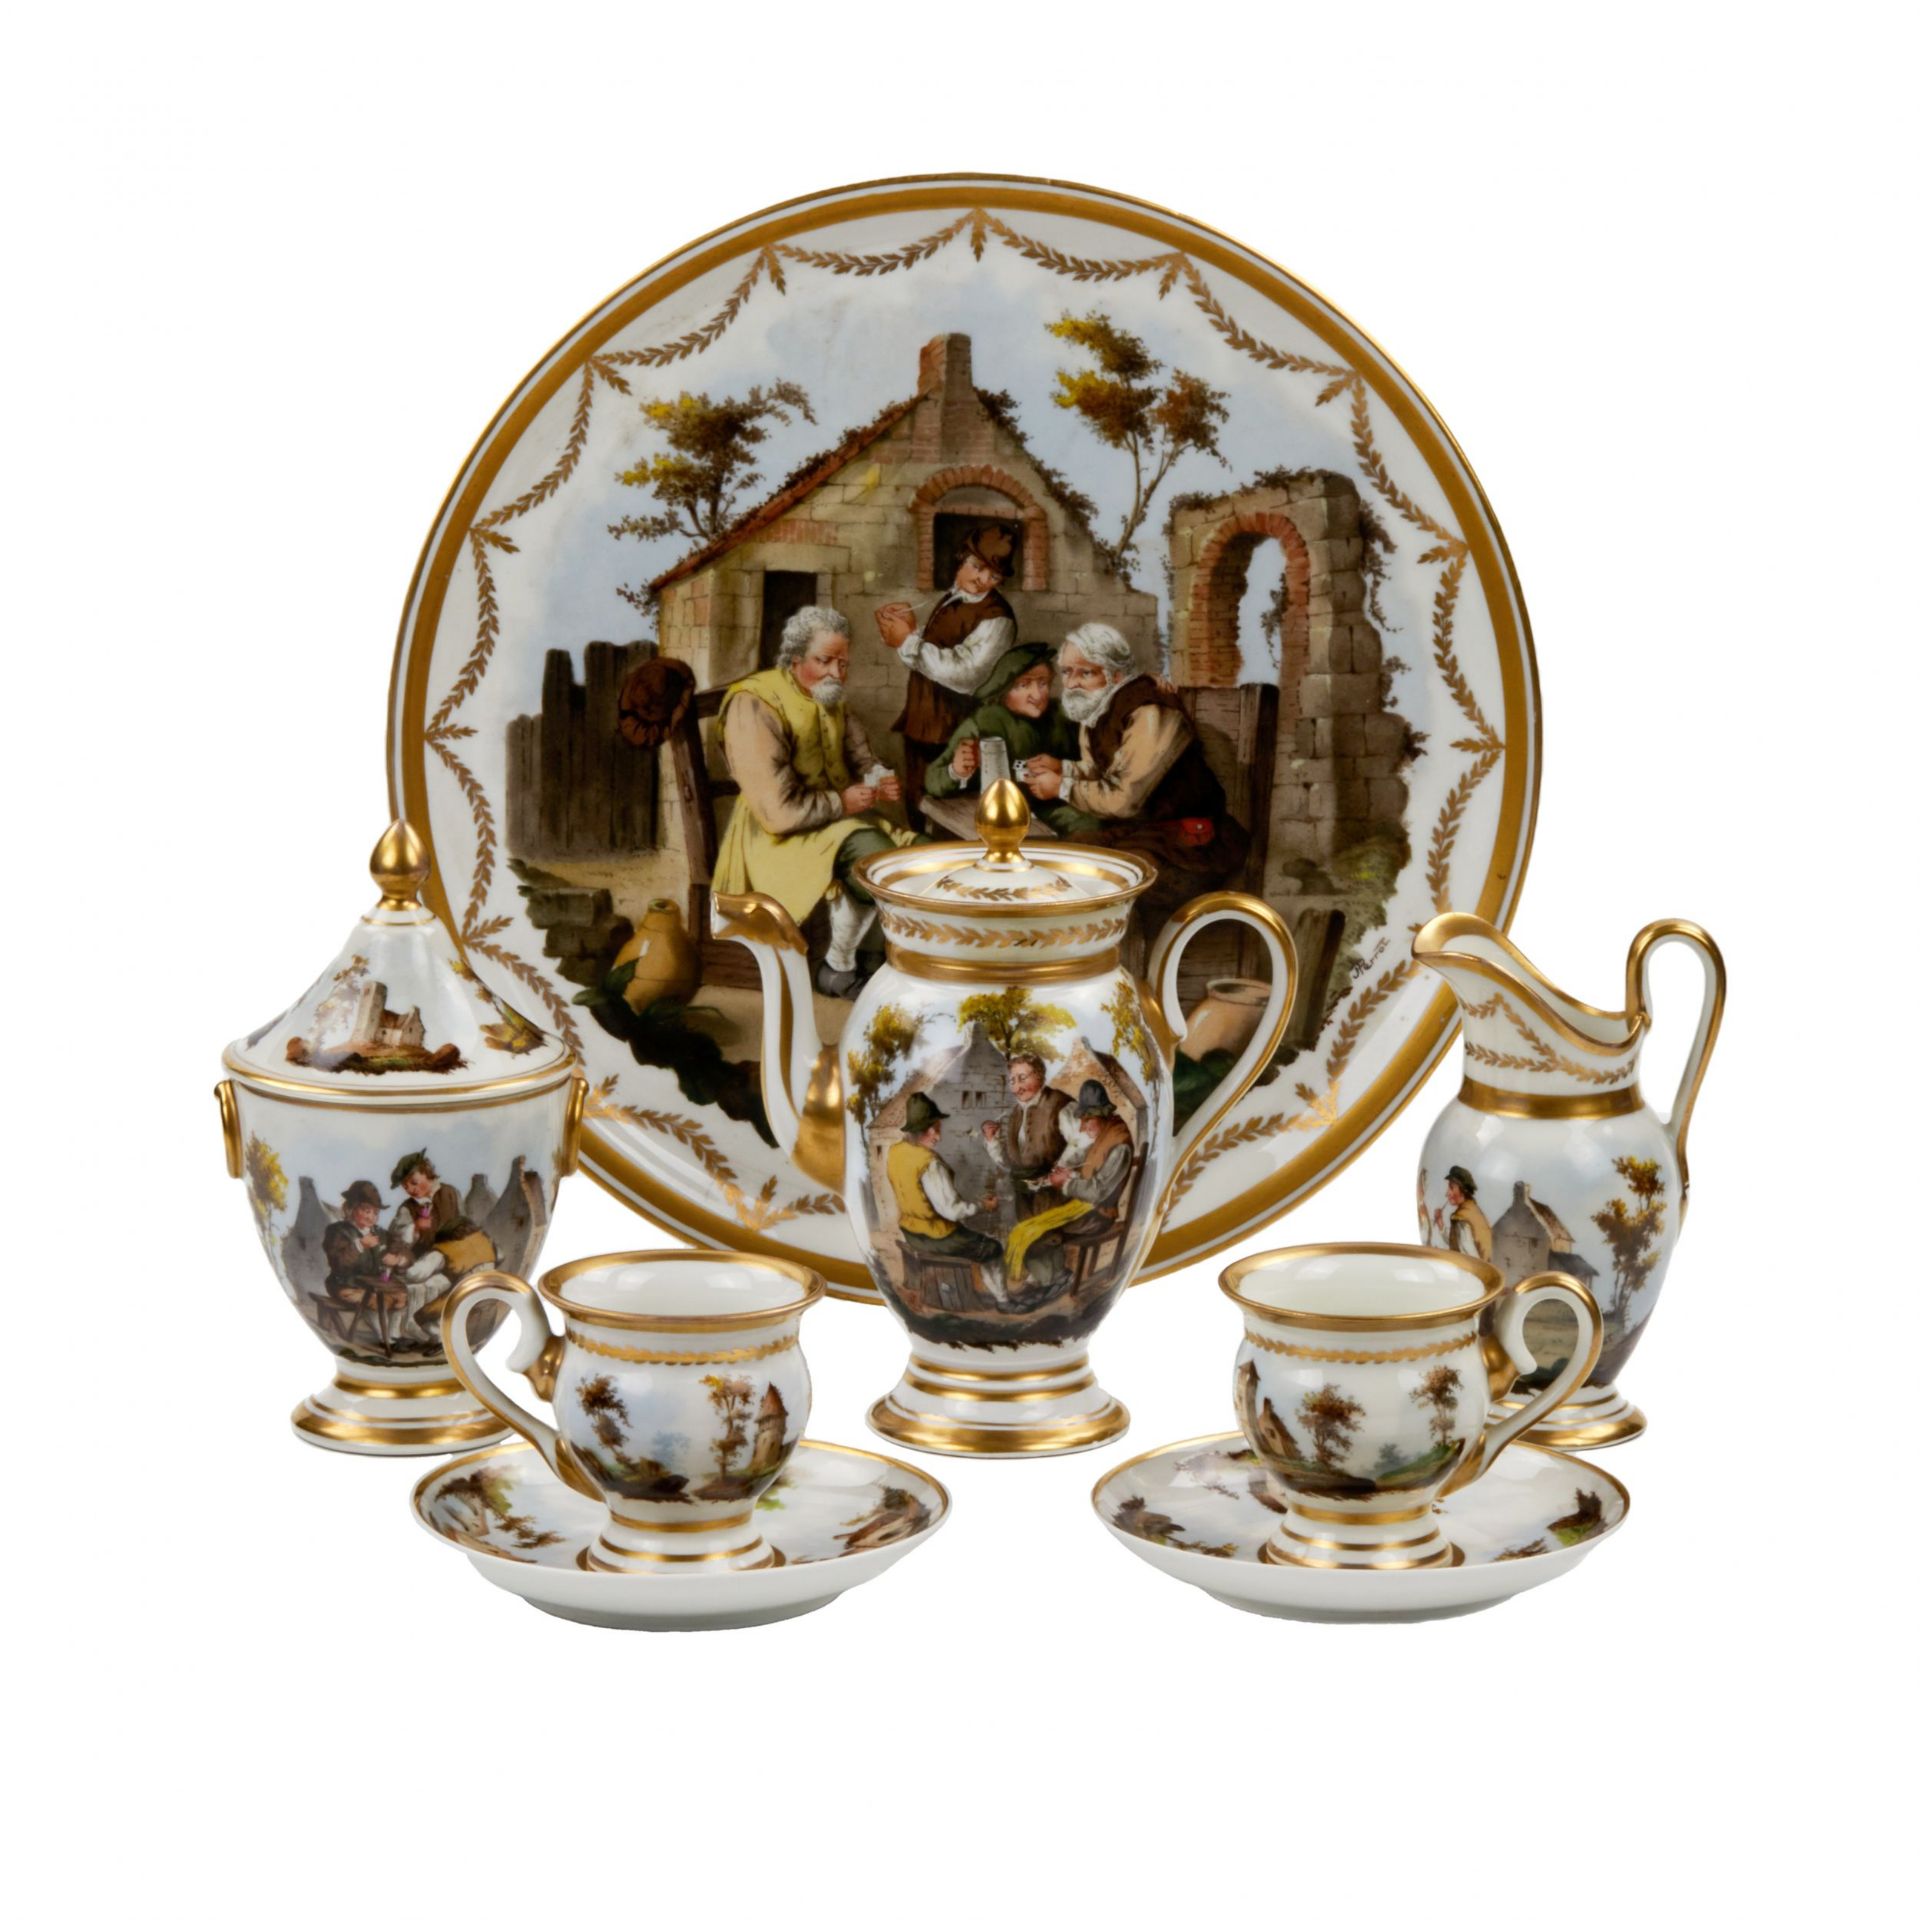 French tete-a-tete porcelain service, 19th century. - Image 19 of 19